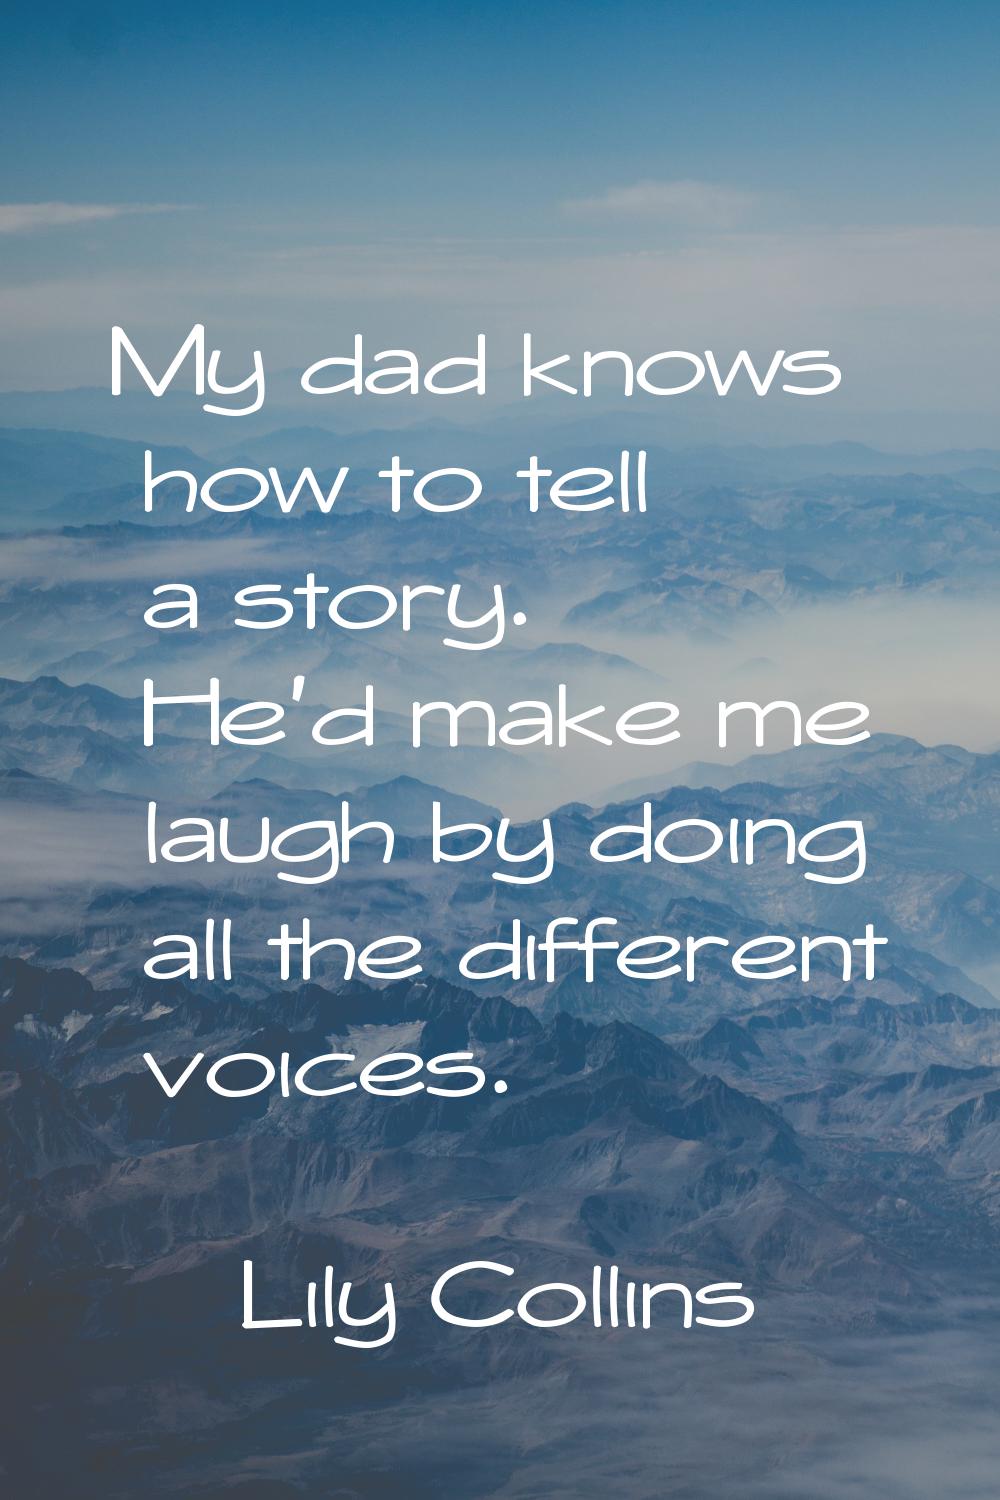 My dad knows how to tell a story. He'd make me laugh by doing all the different voices.